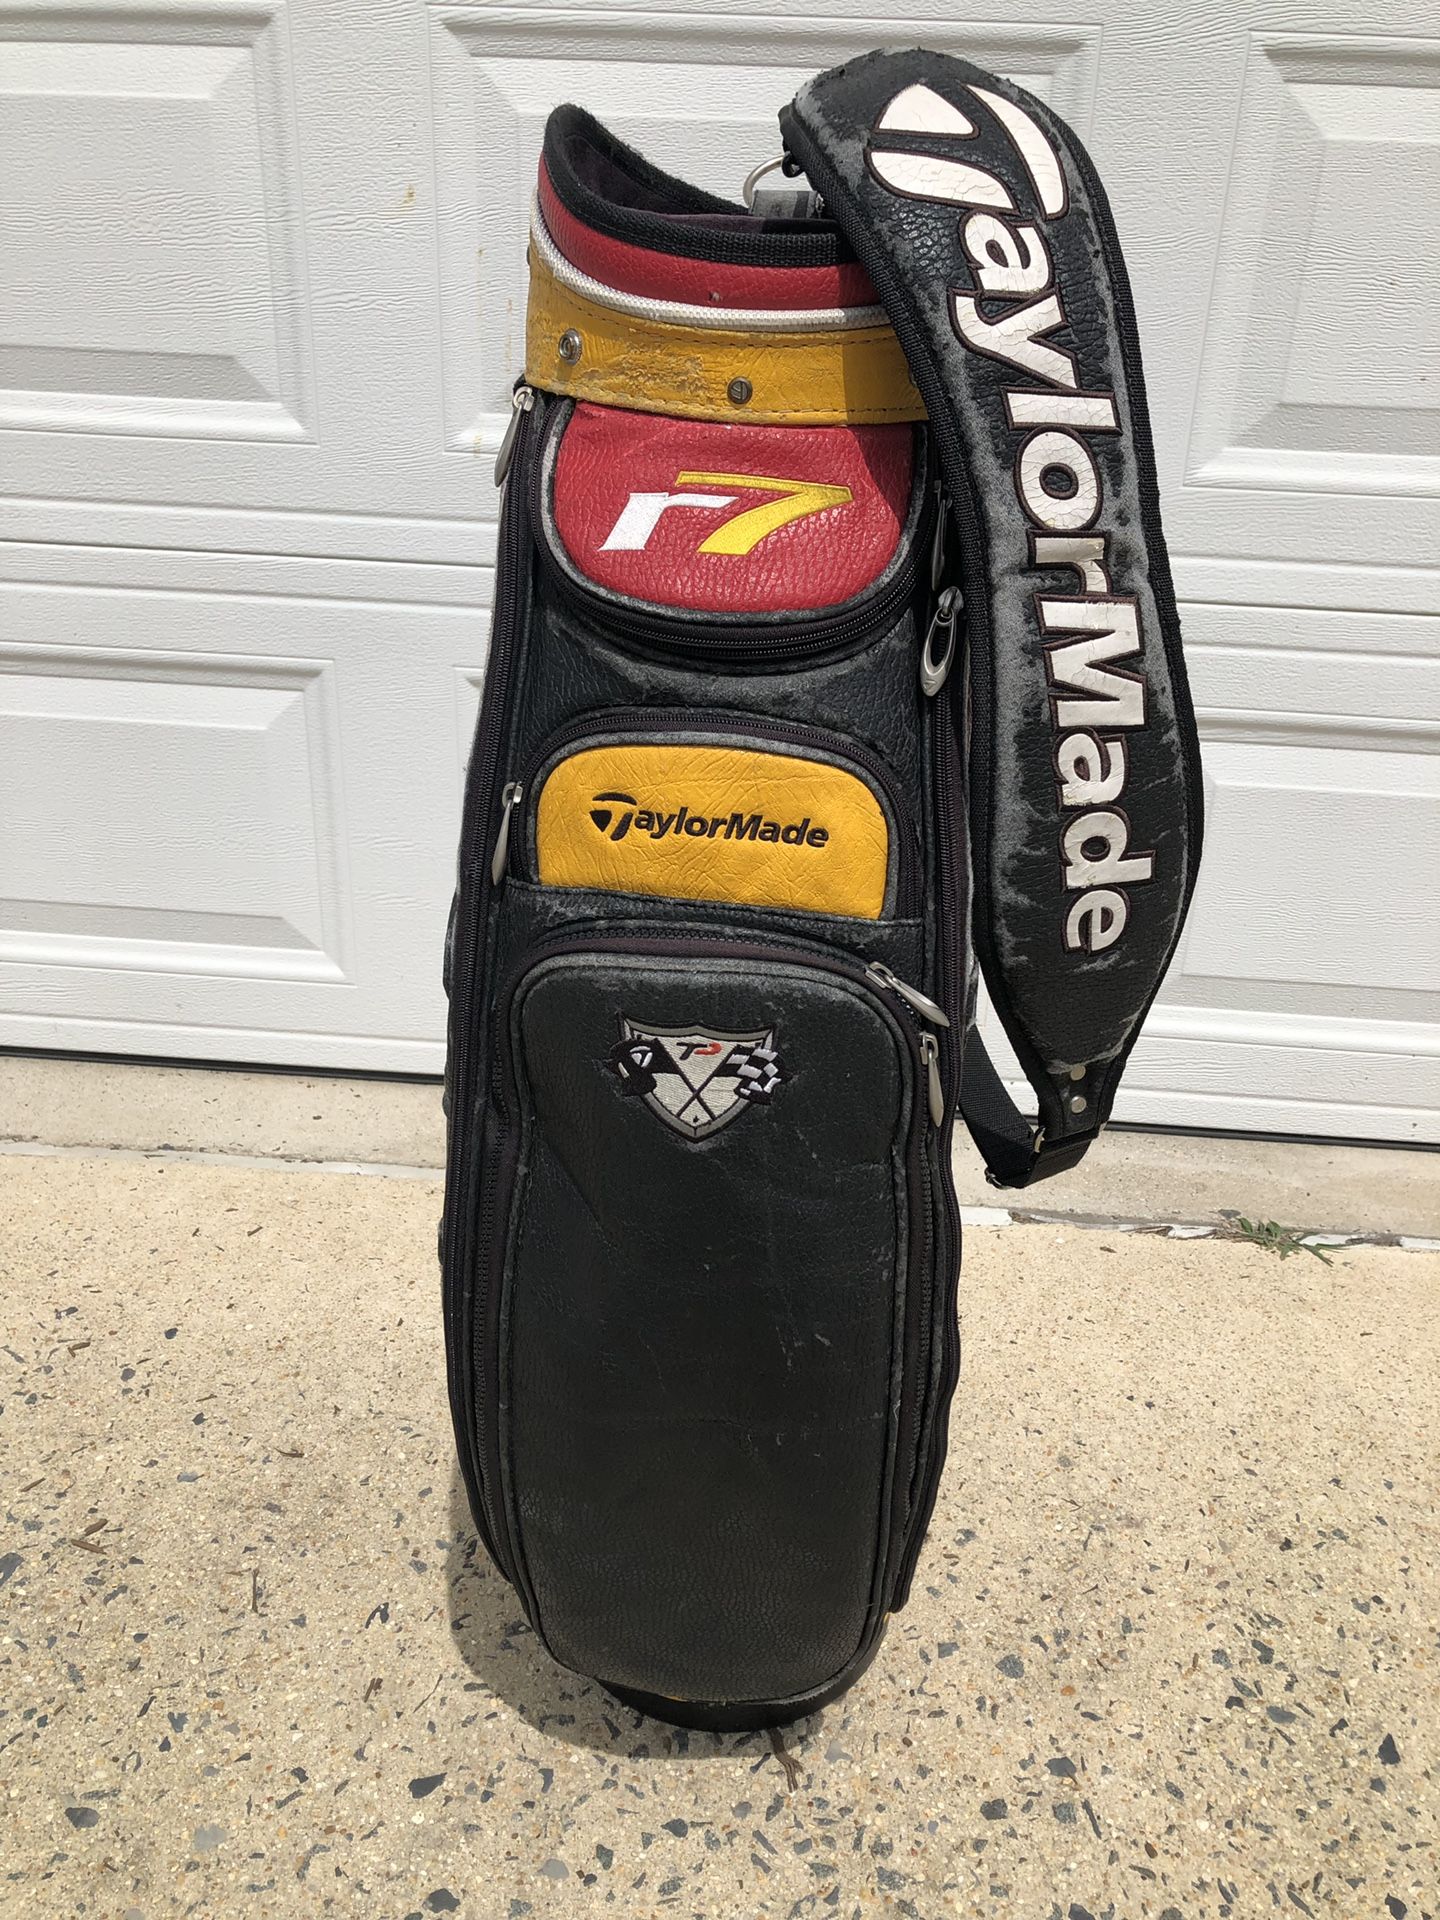 Taylormade R7 Hundred Series Tour Preferred Golf Cart Bag Professional Caddy Bag